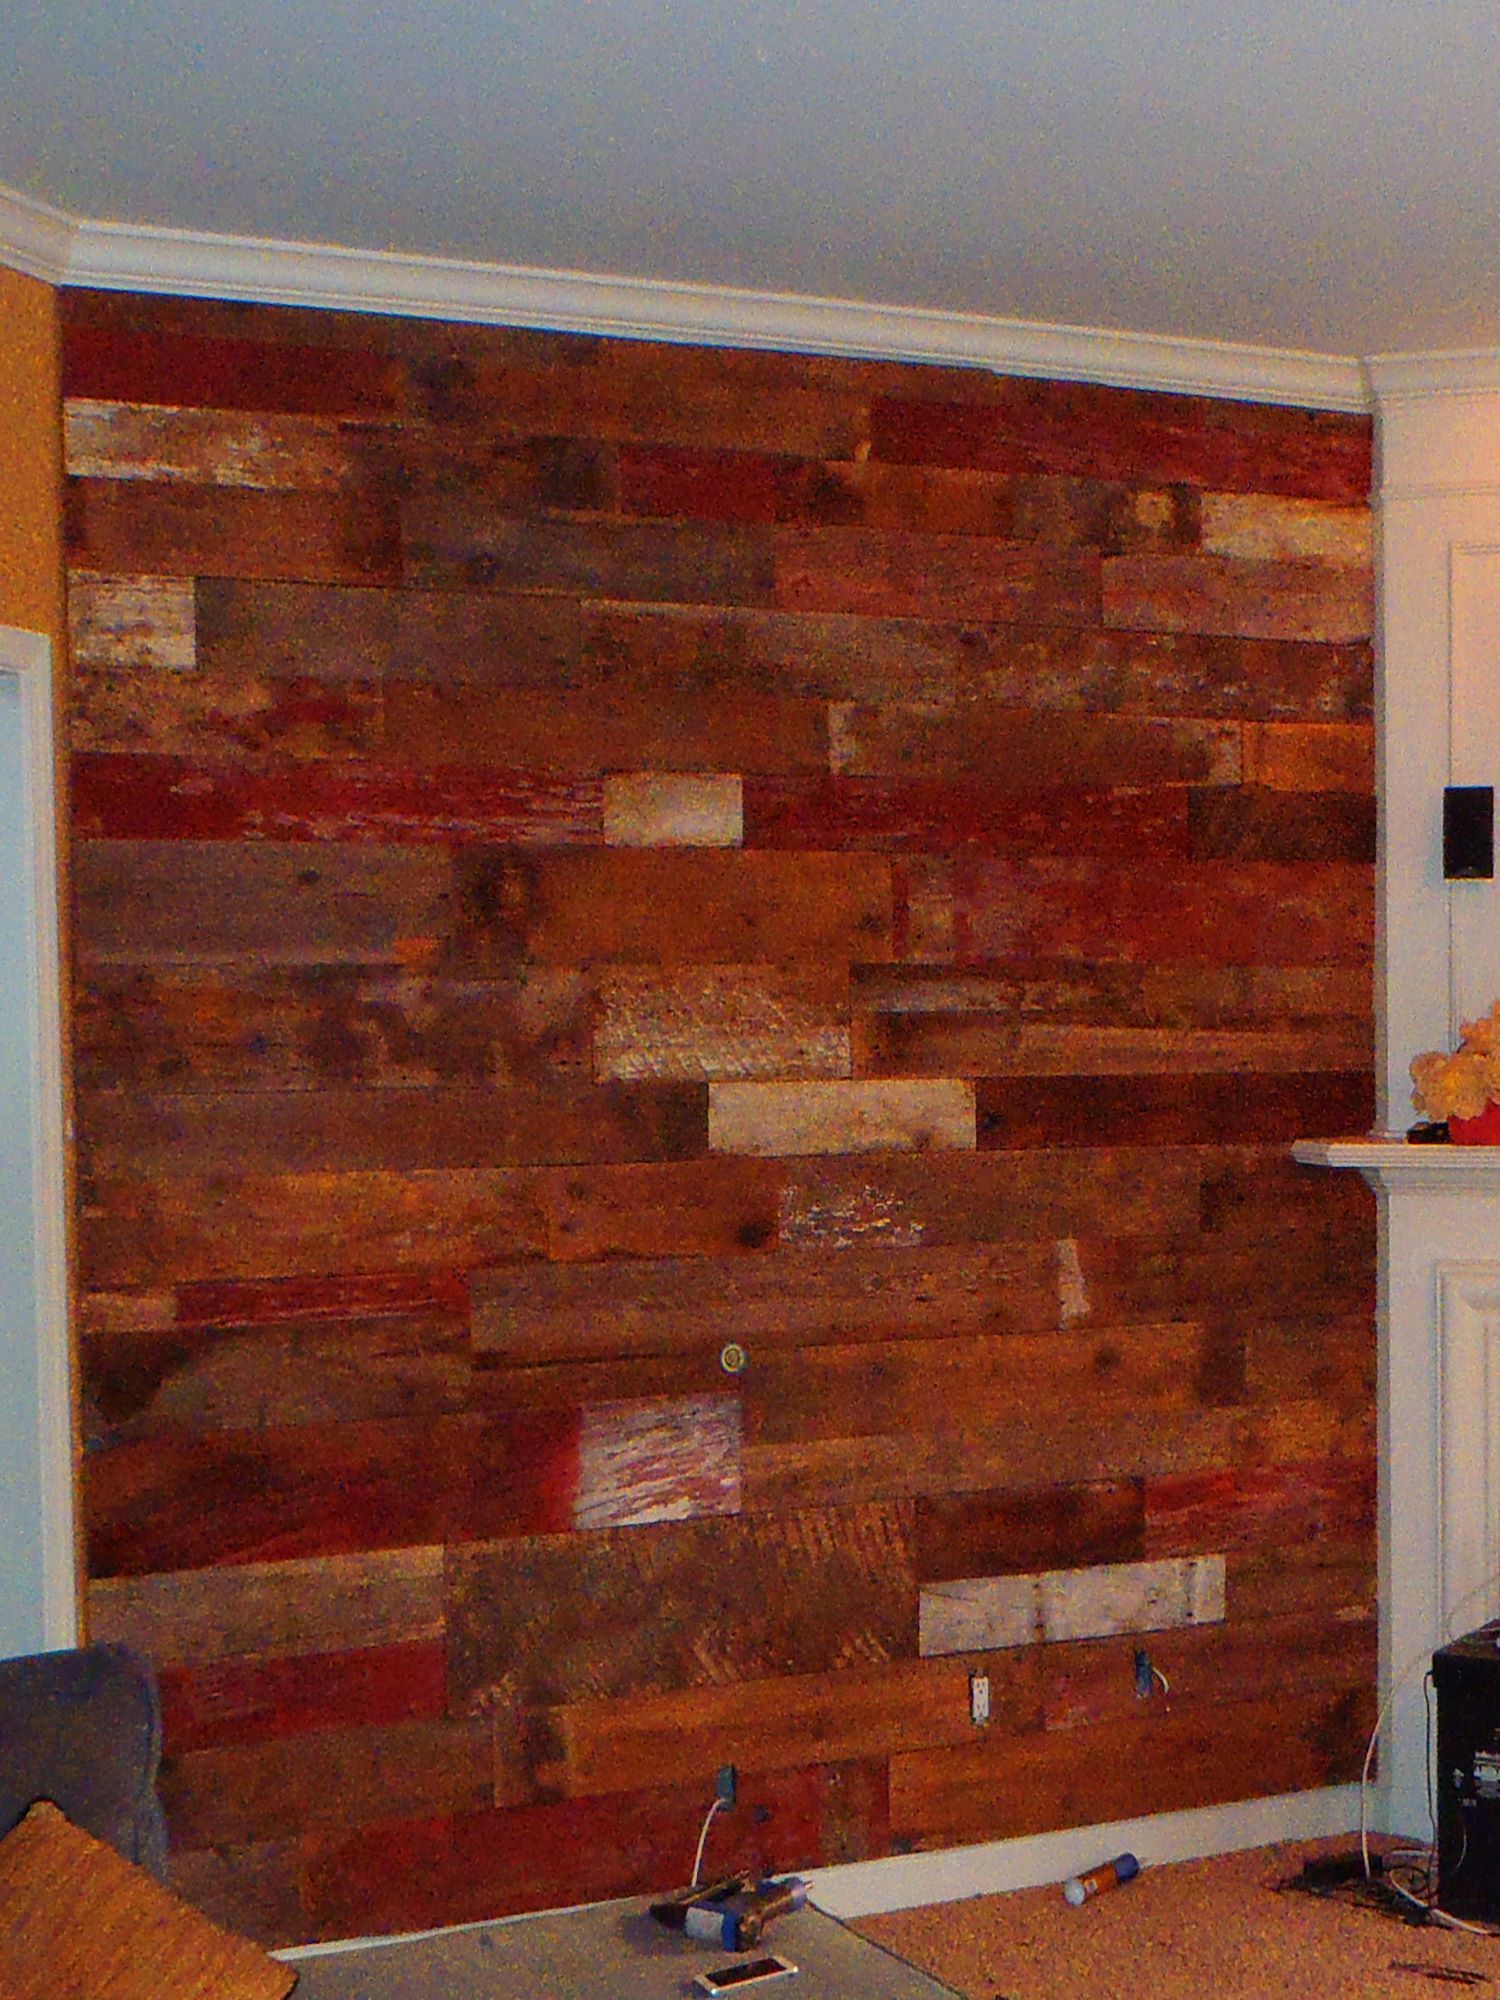 A primarily red barnwood accent wall in a customer's home